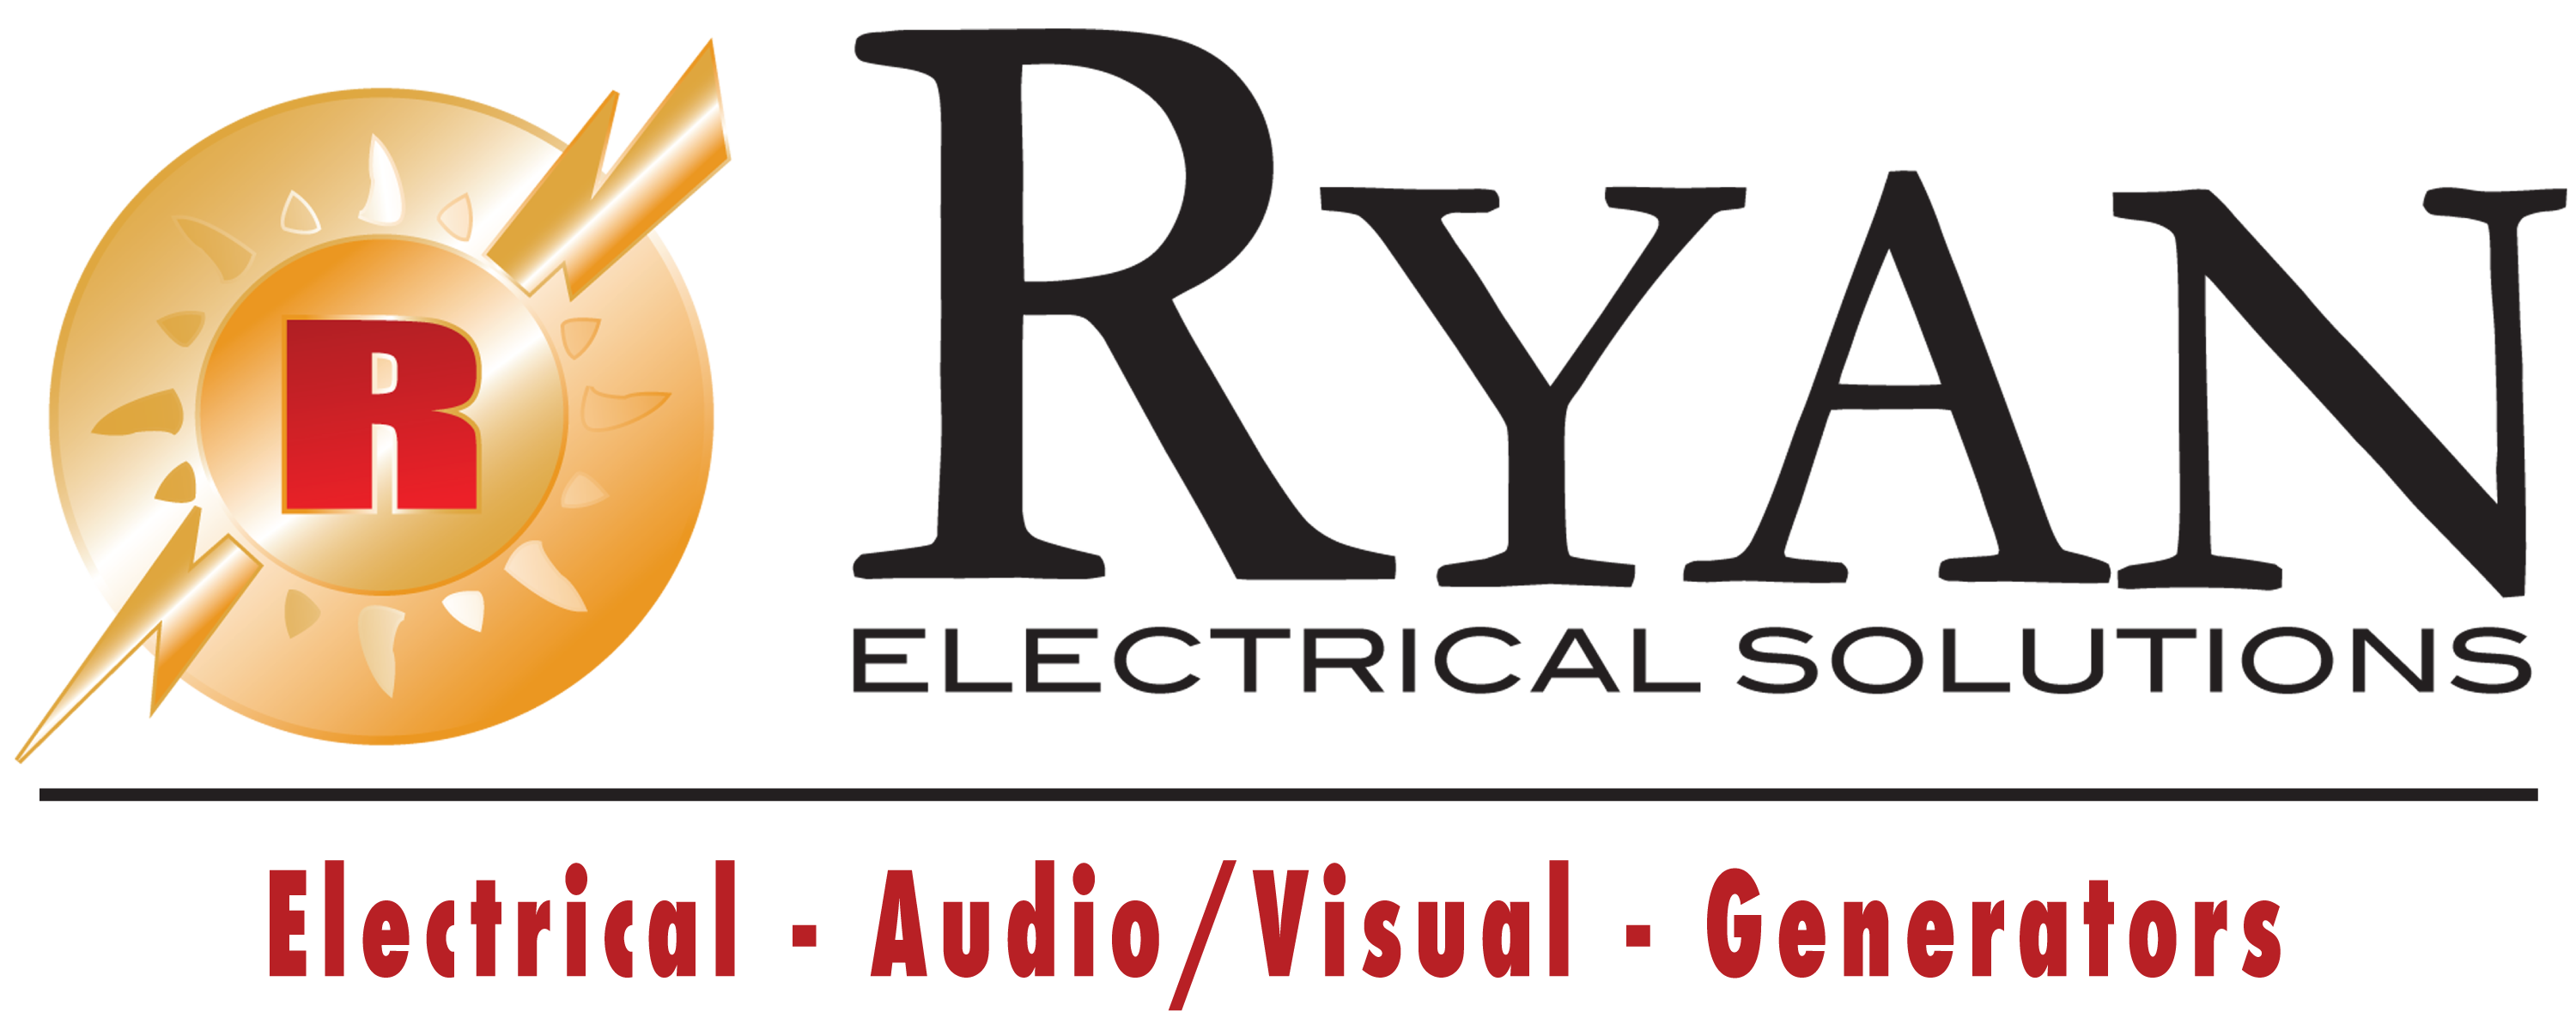 Ryan Electrical Solutions